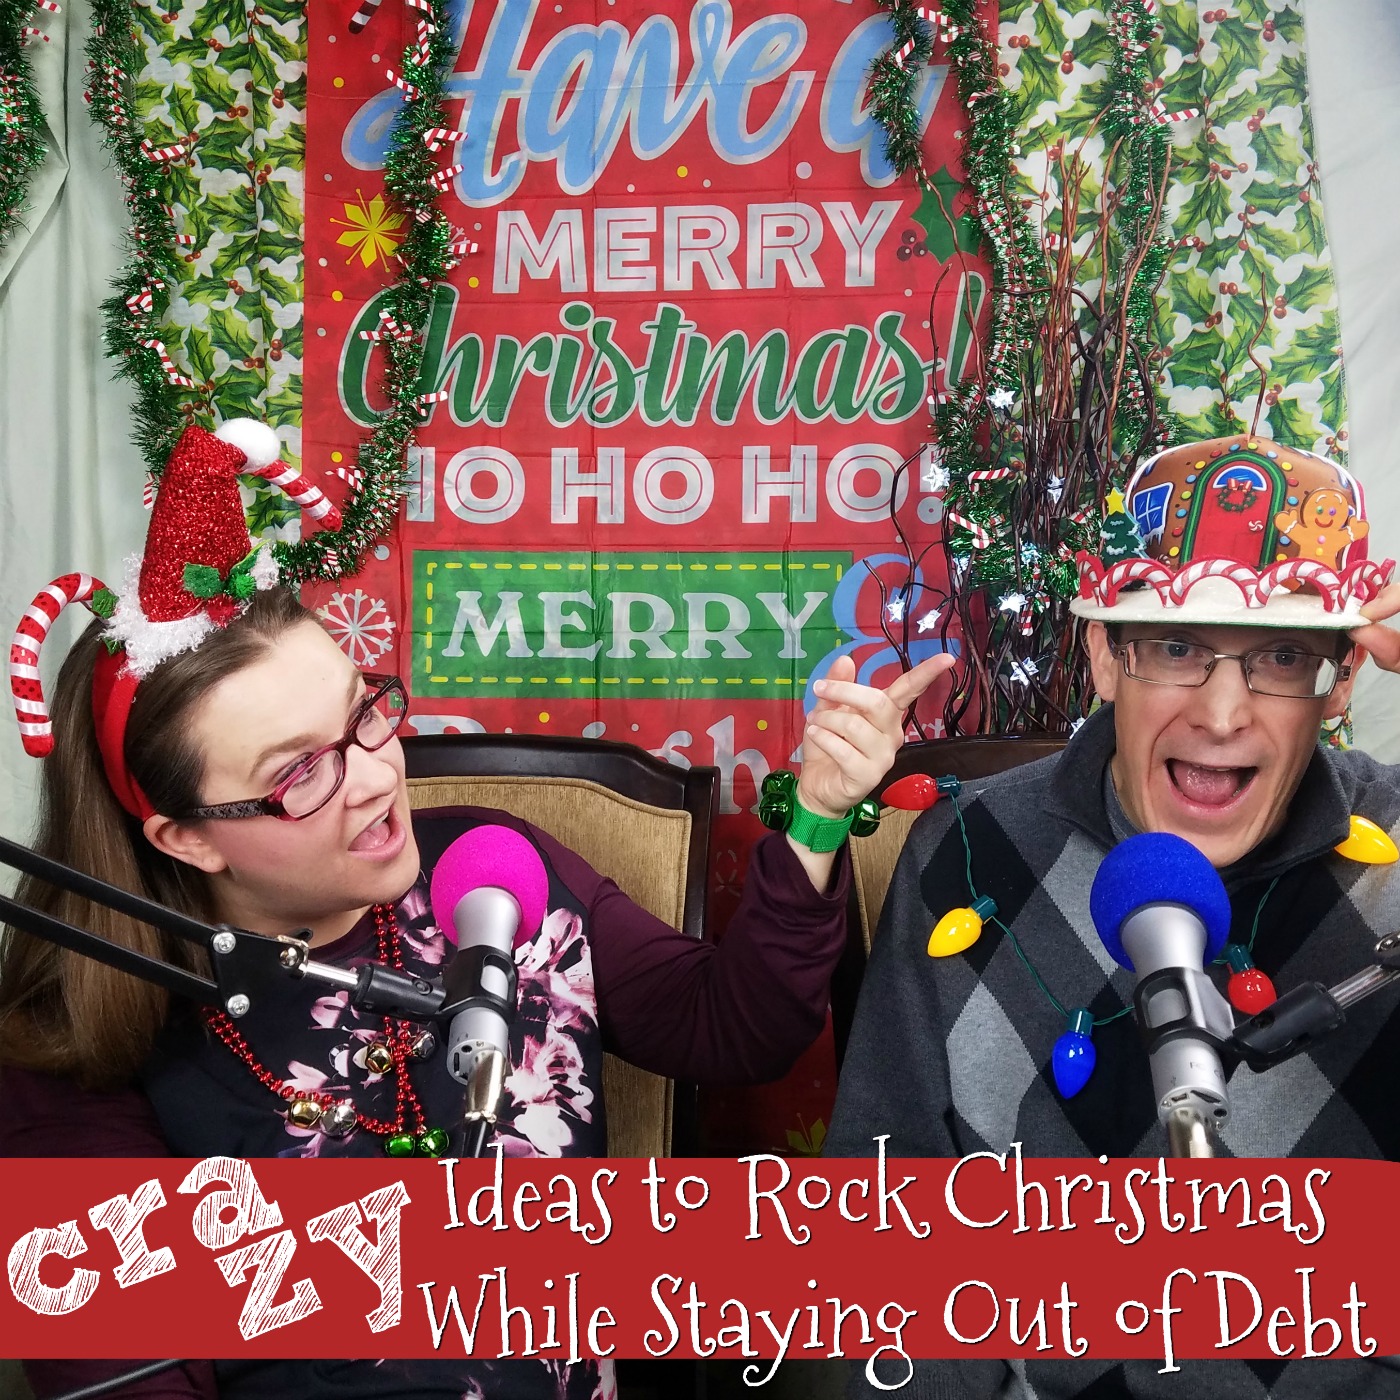 TTC 004 Crazy Ideas to Rock Christmas While Staying Out of Debt